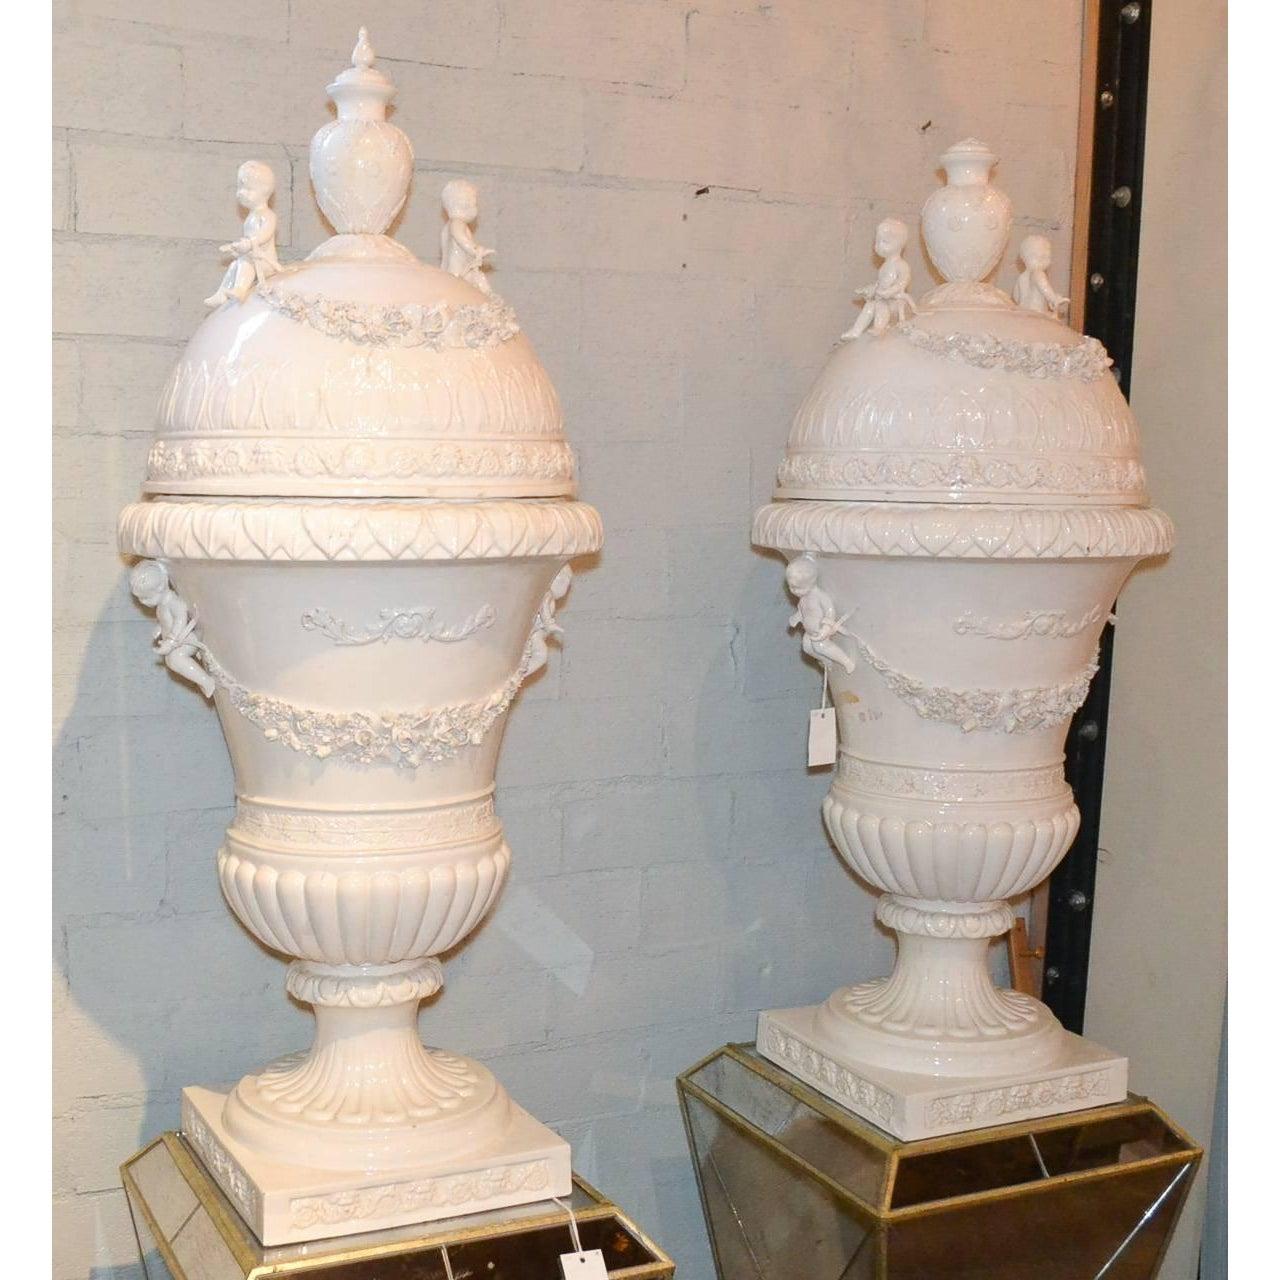 Stunning pair of large Italian glazed porcelain capped urns. Having beautifully intricate floral swag detailing, charming putti adornments, and wonderful glazed patina. Beyond chic for numerous designs!